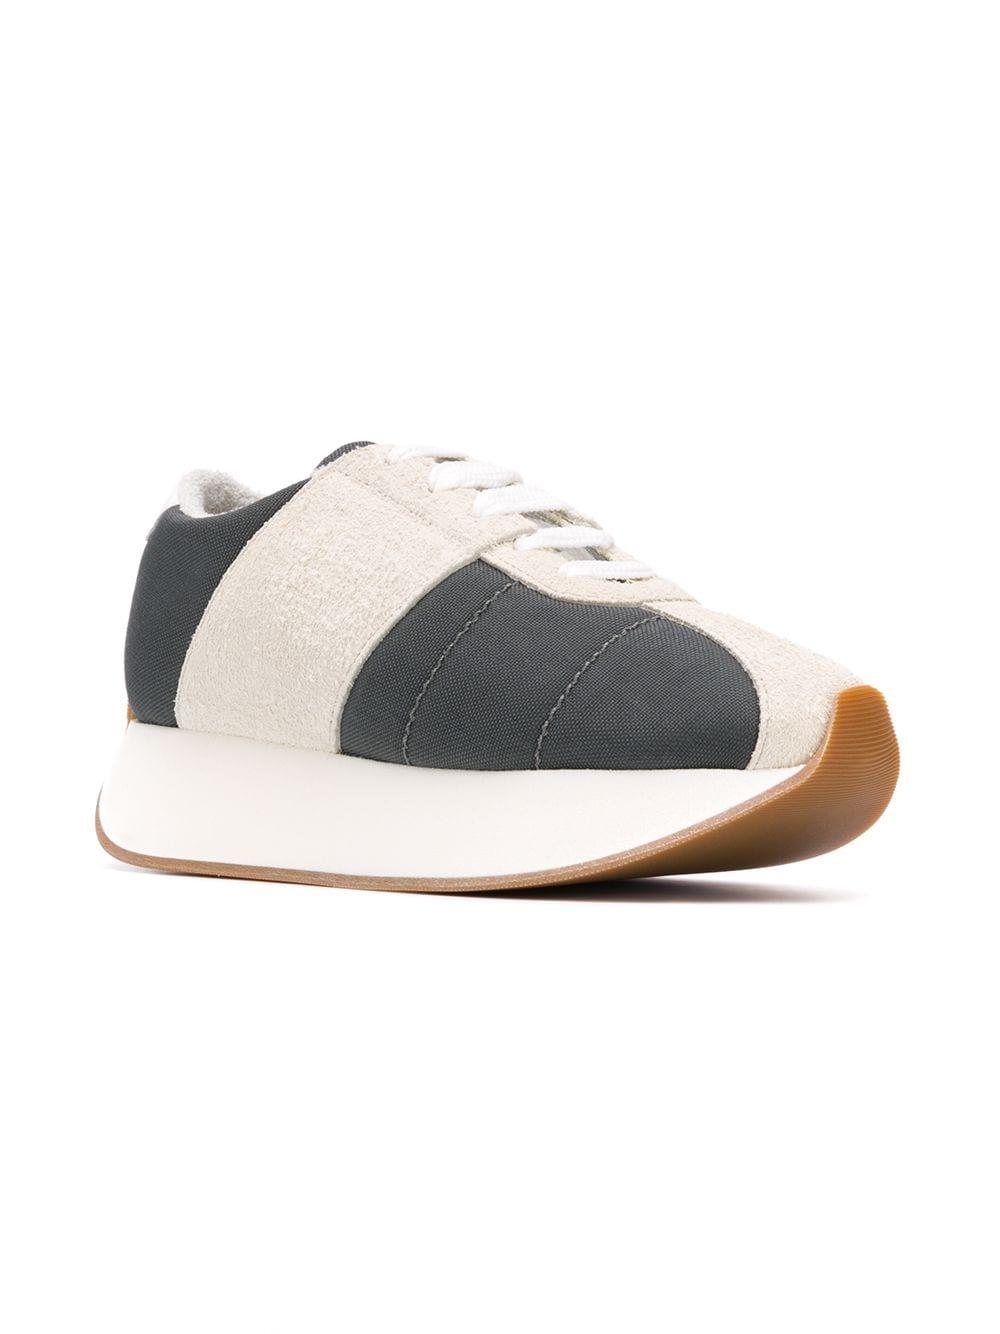 Marni Cotton Bigfoot Sneakers in White | Lyst